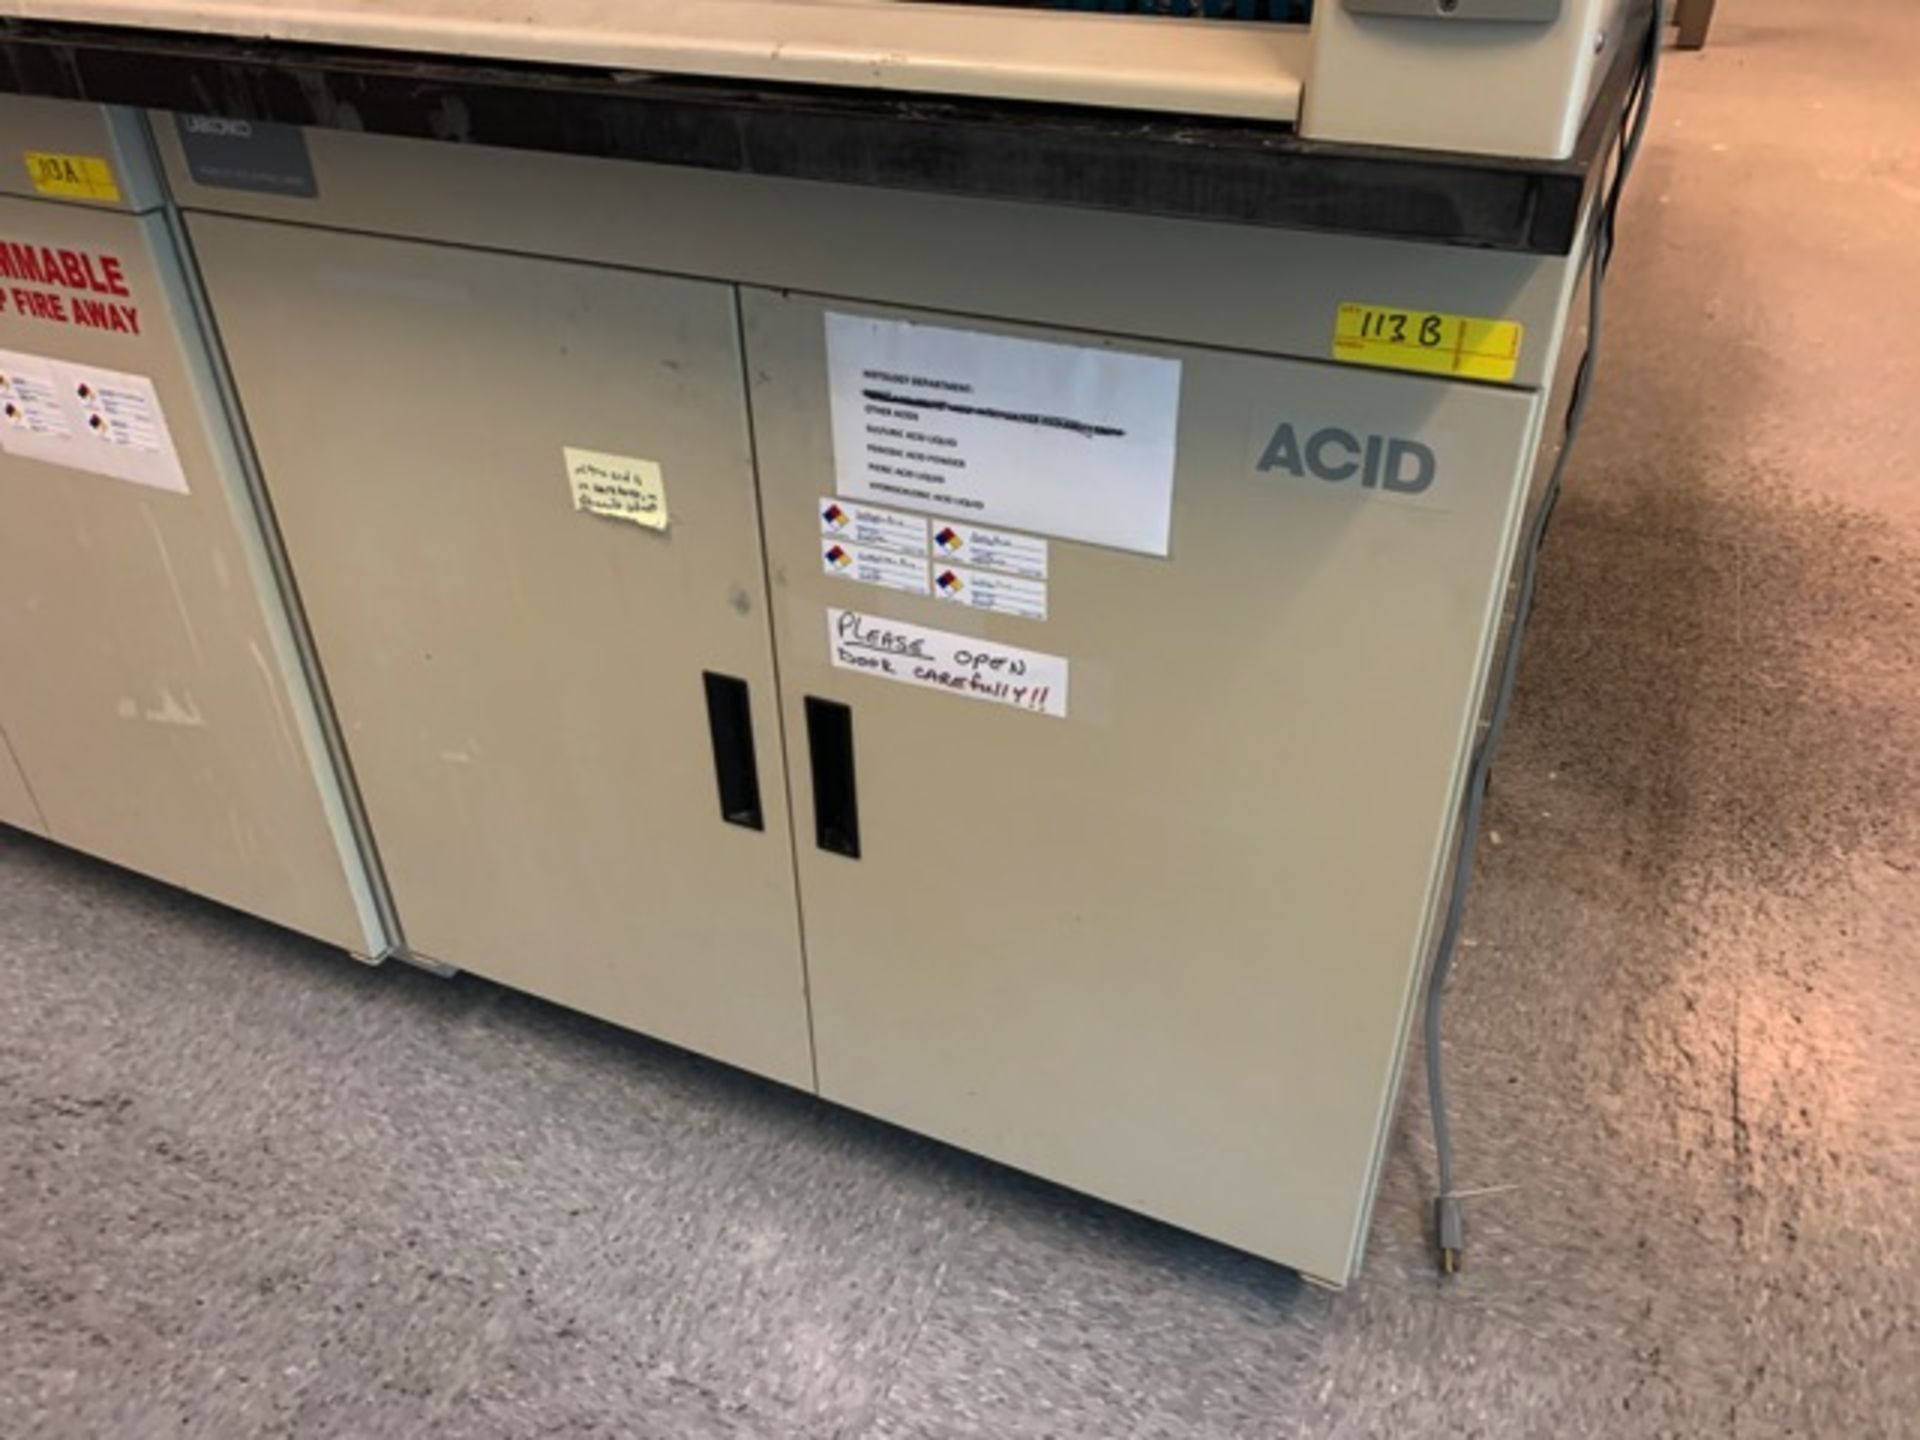 Labconco 2 Door Protector Acid Storage Cabinet, Delayed Checkout, To be Removed After Fume Hood